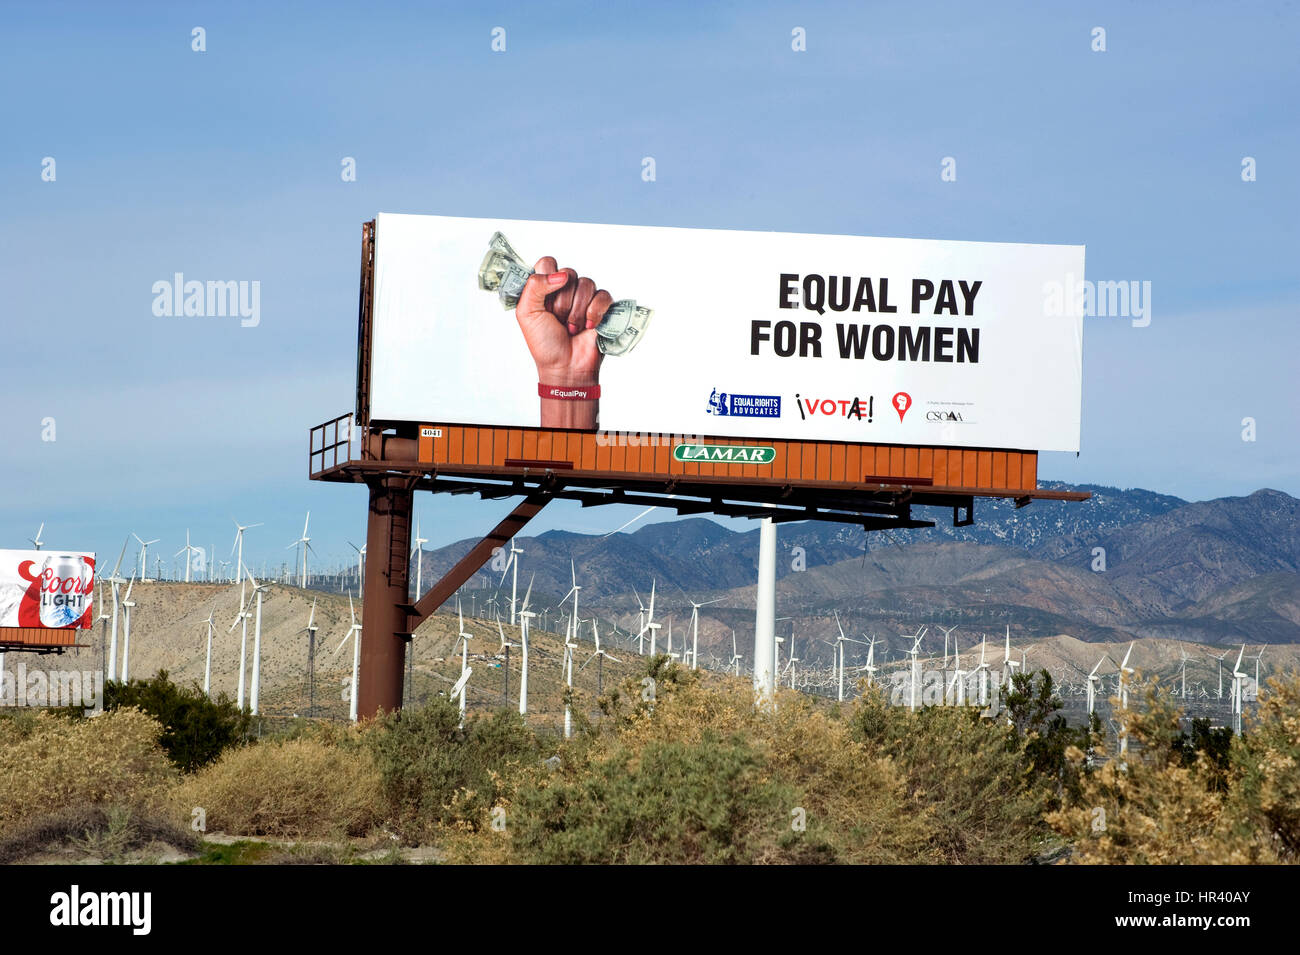 Billboard supporting equal pay for women in the desert near Palm Springs, CA Stock Photo